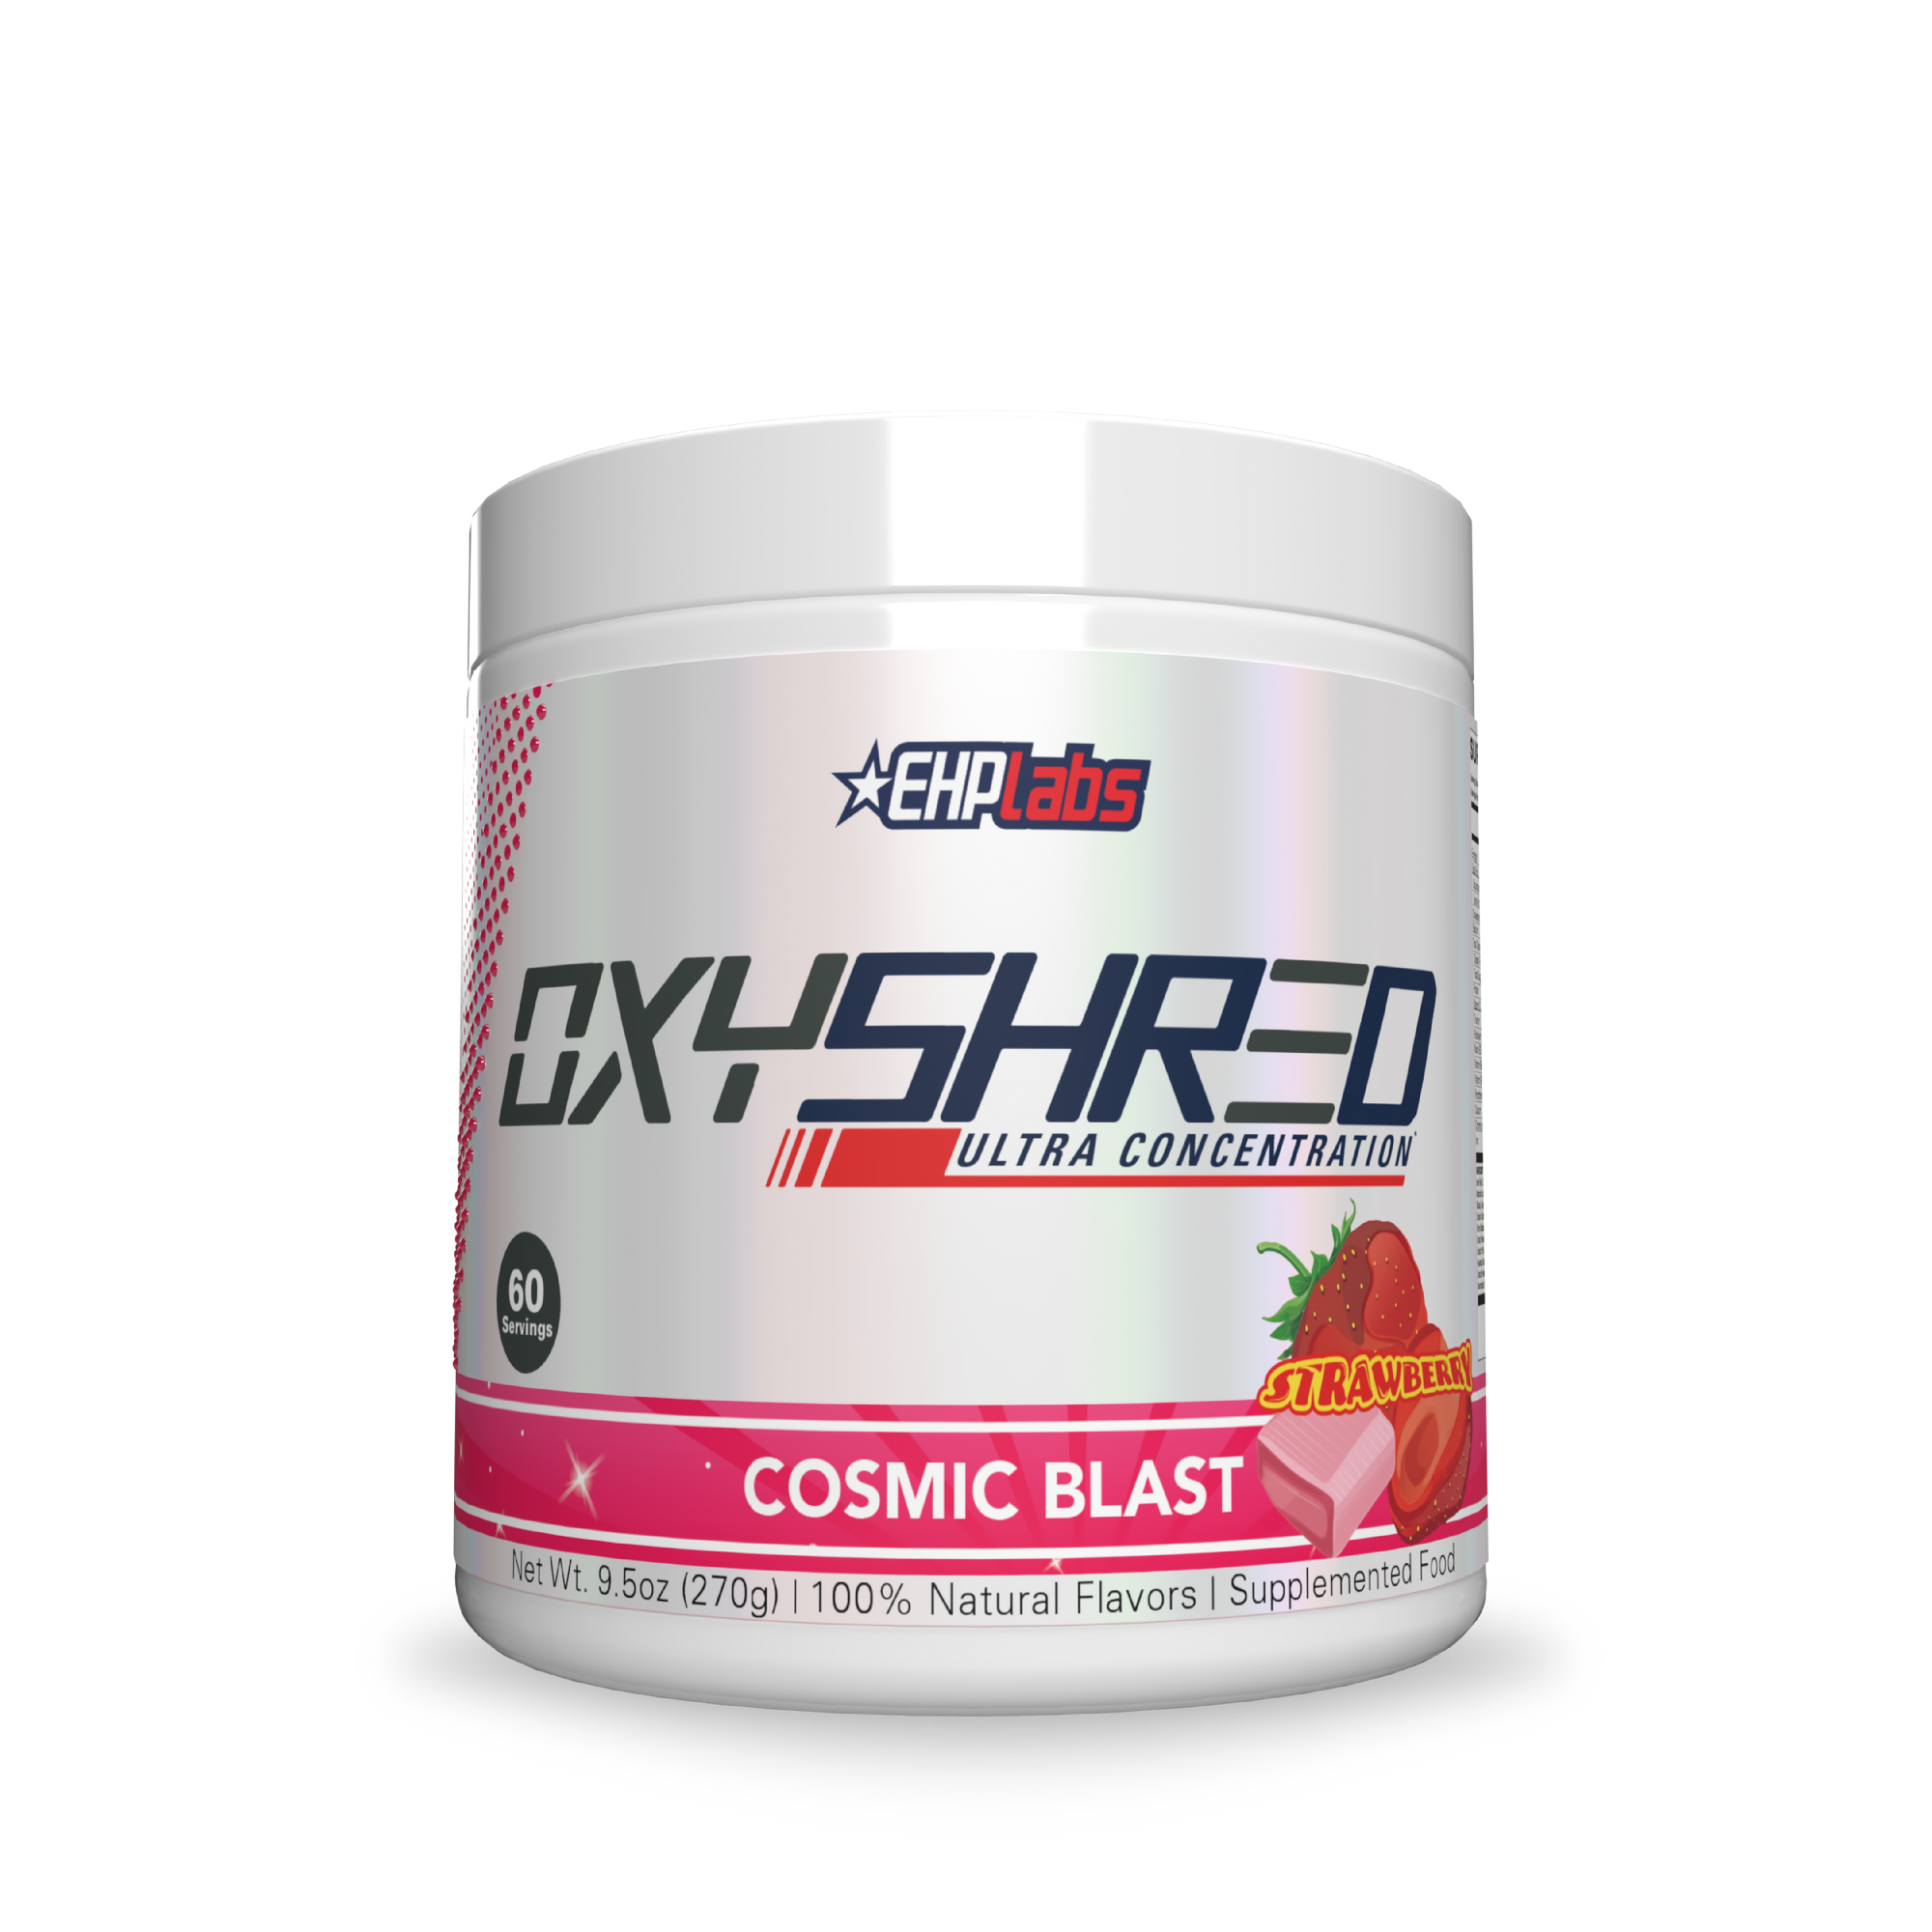 EHP Labs OxyShred Ultra Concentrate | 11 Flavours - Fitness Hero Brand new